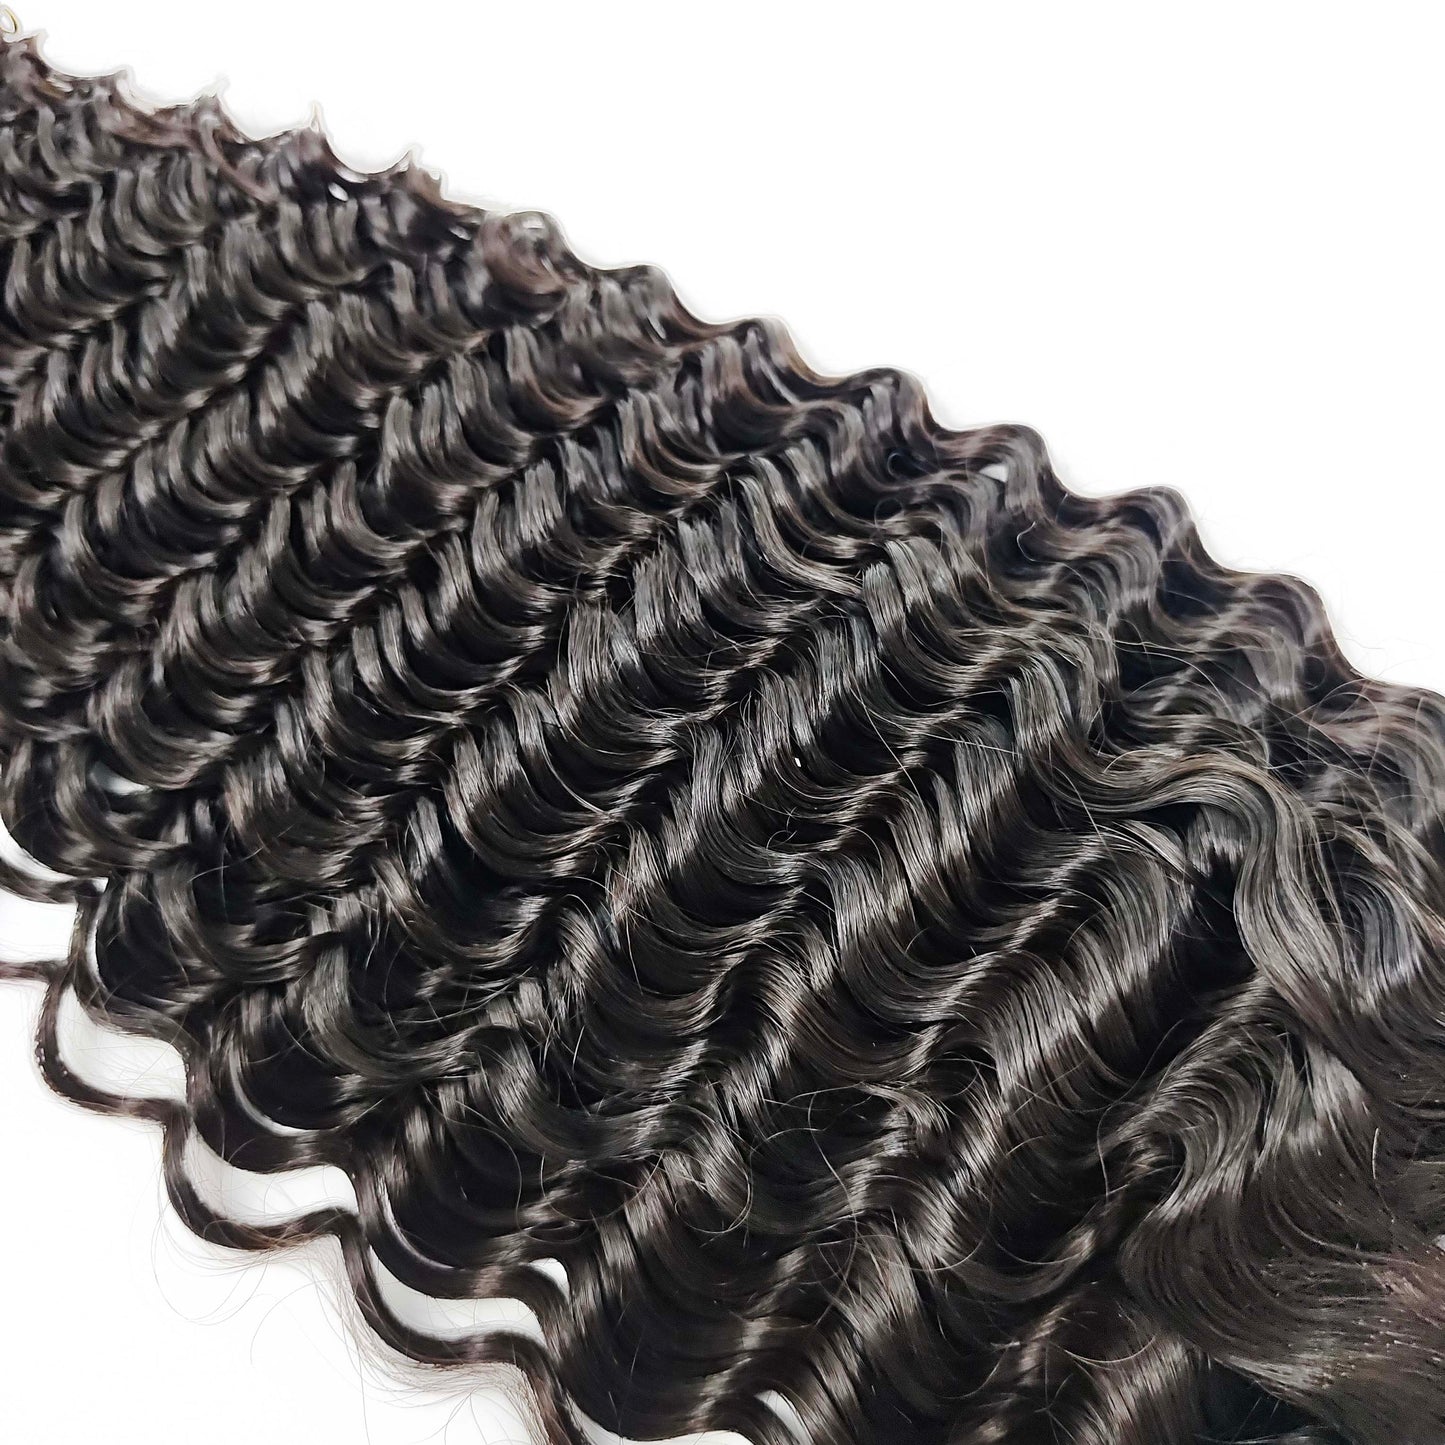 Deep Curly Virgin Human Hair Extensions with 3 Years Life Time